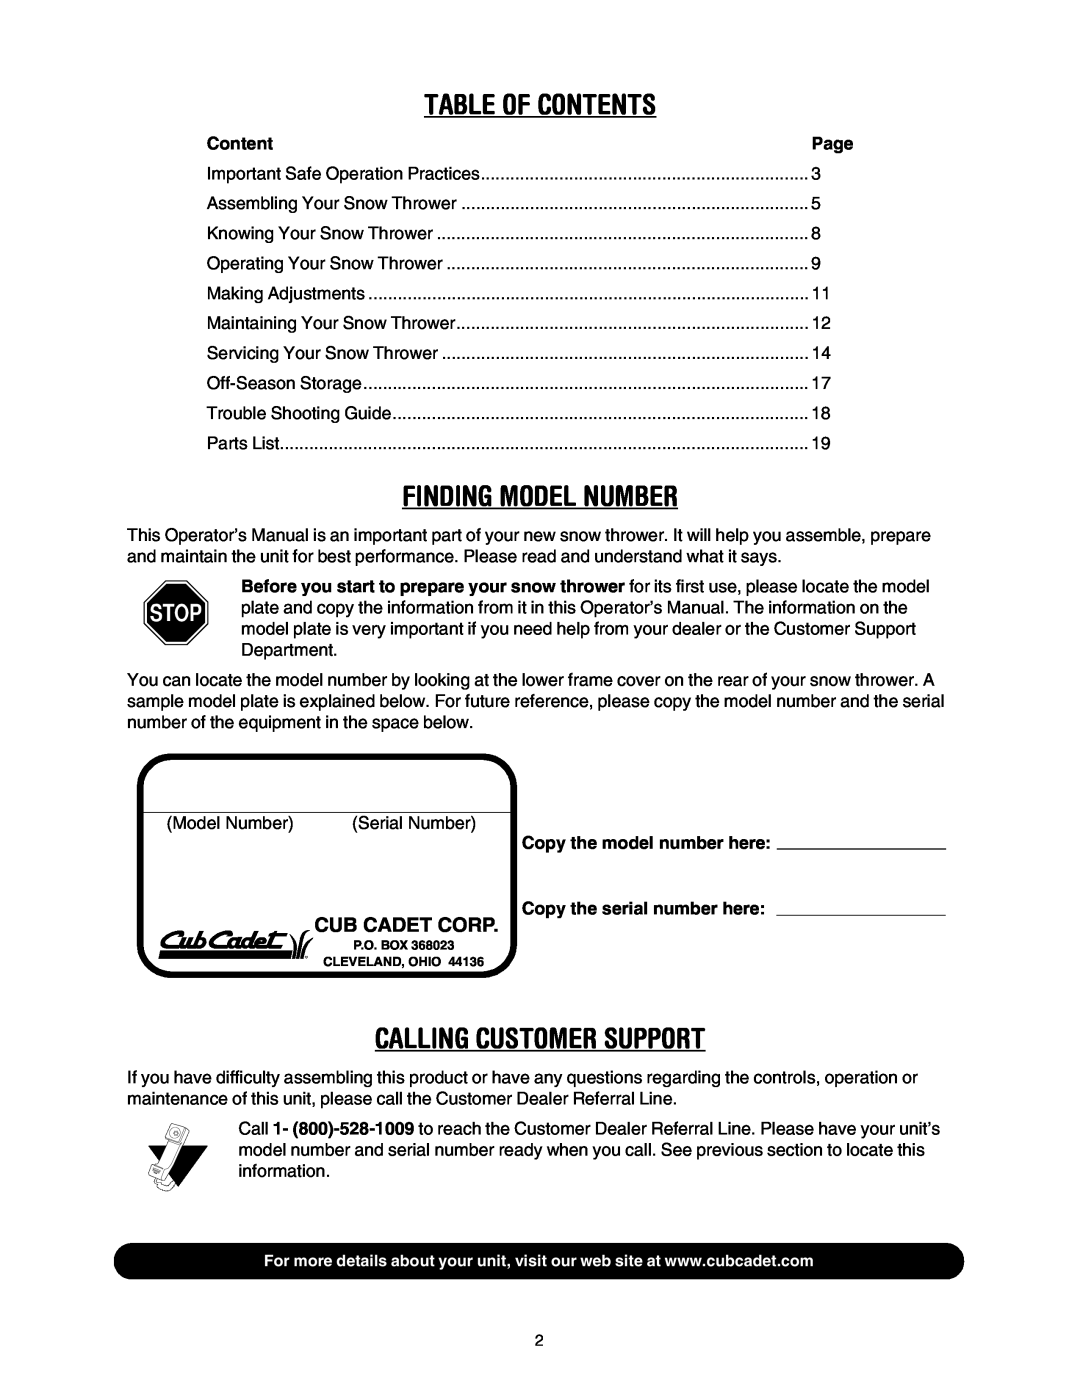 Cub Cadet 1345 SWE manual Table Of Contents, Finding Model Number, Calling Customer Support, Cub Cadet Corp 